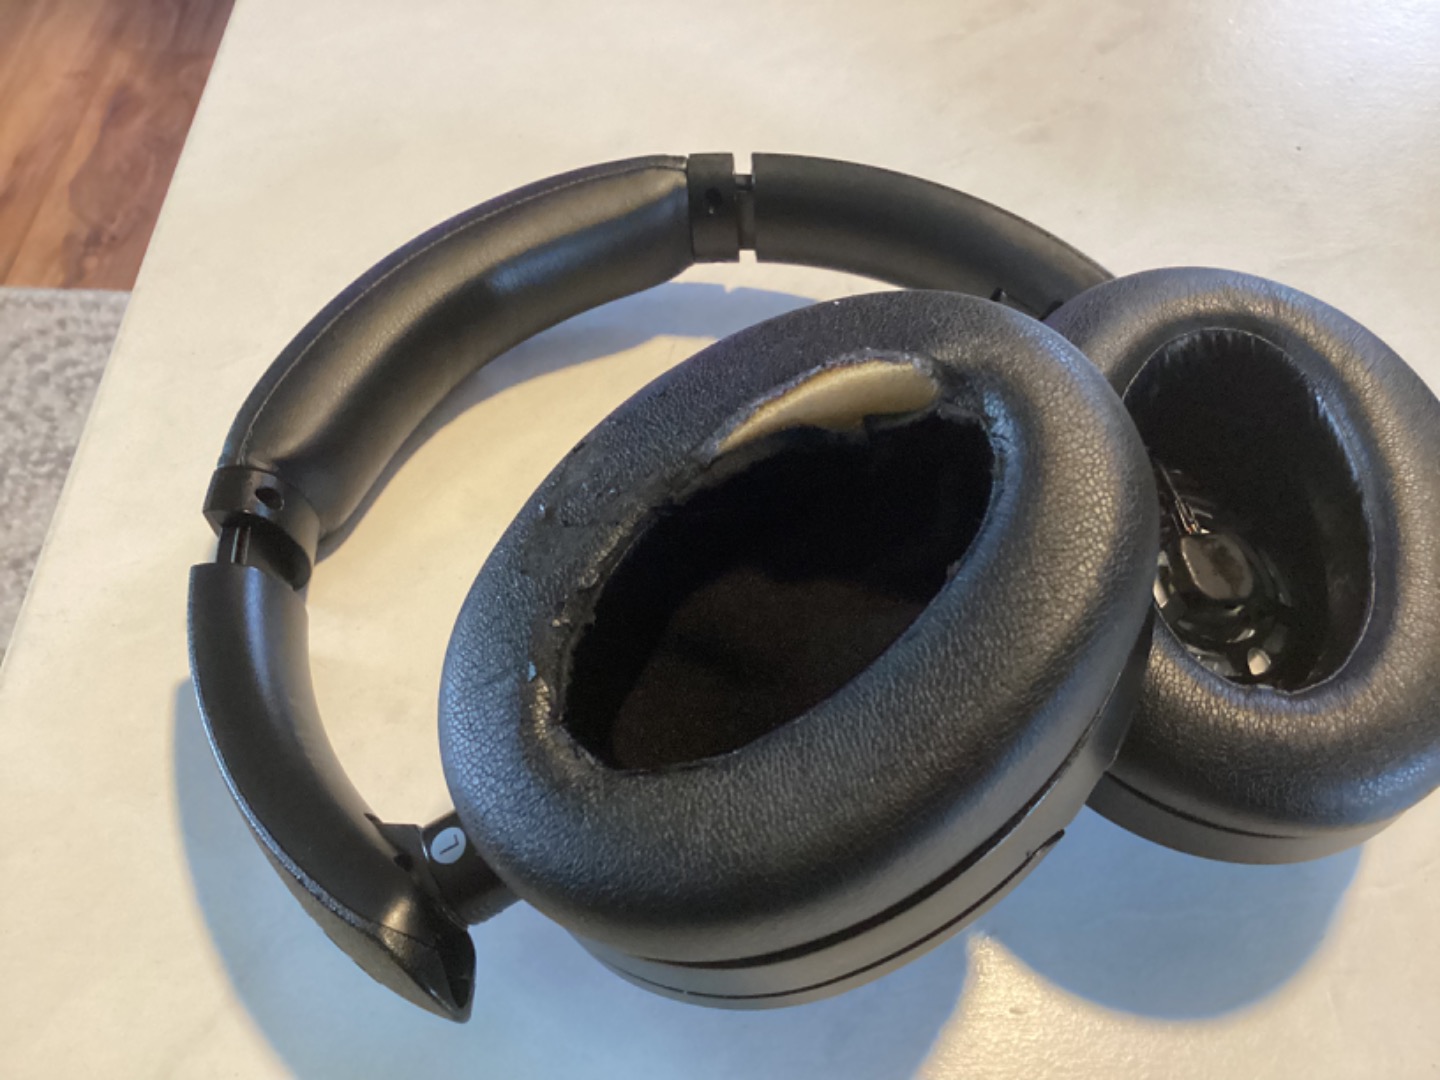 Sony WH-XB910N review: Active Noise Cancellation and a lot of bass 